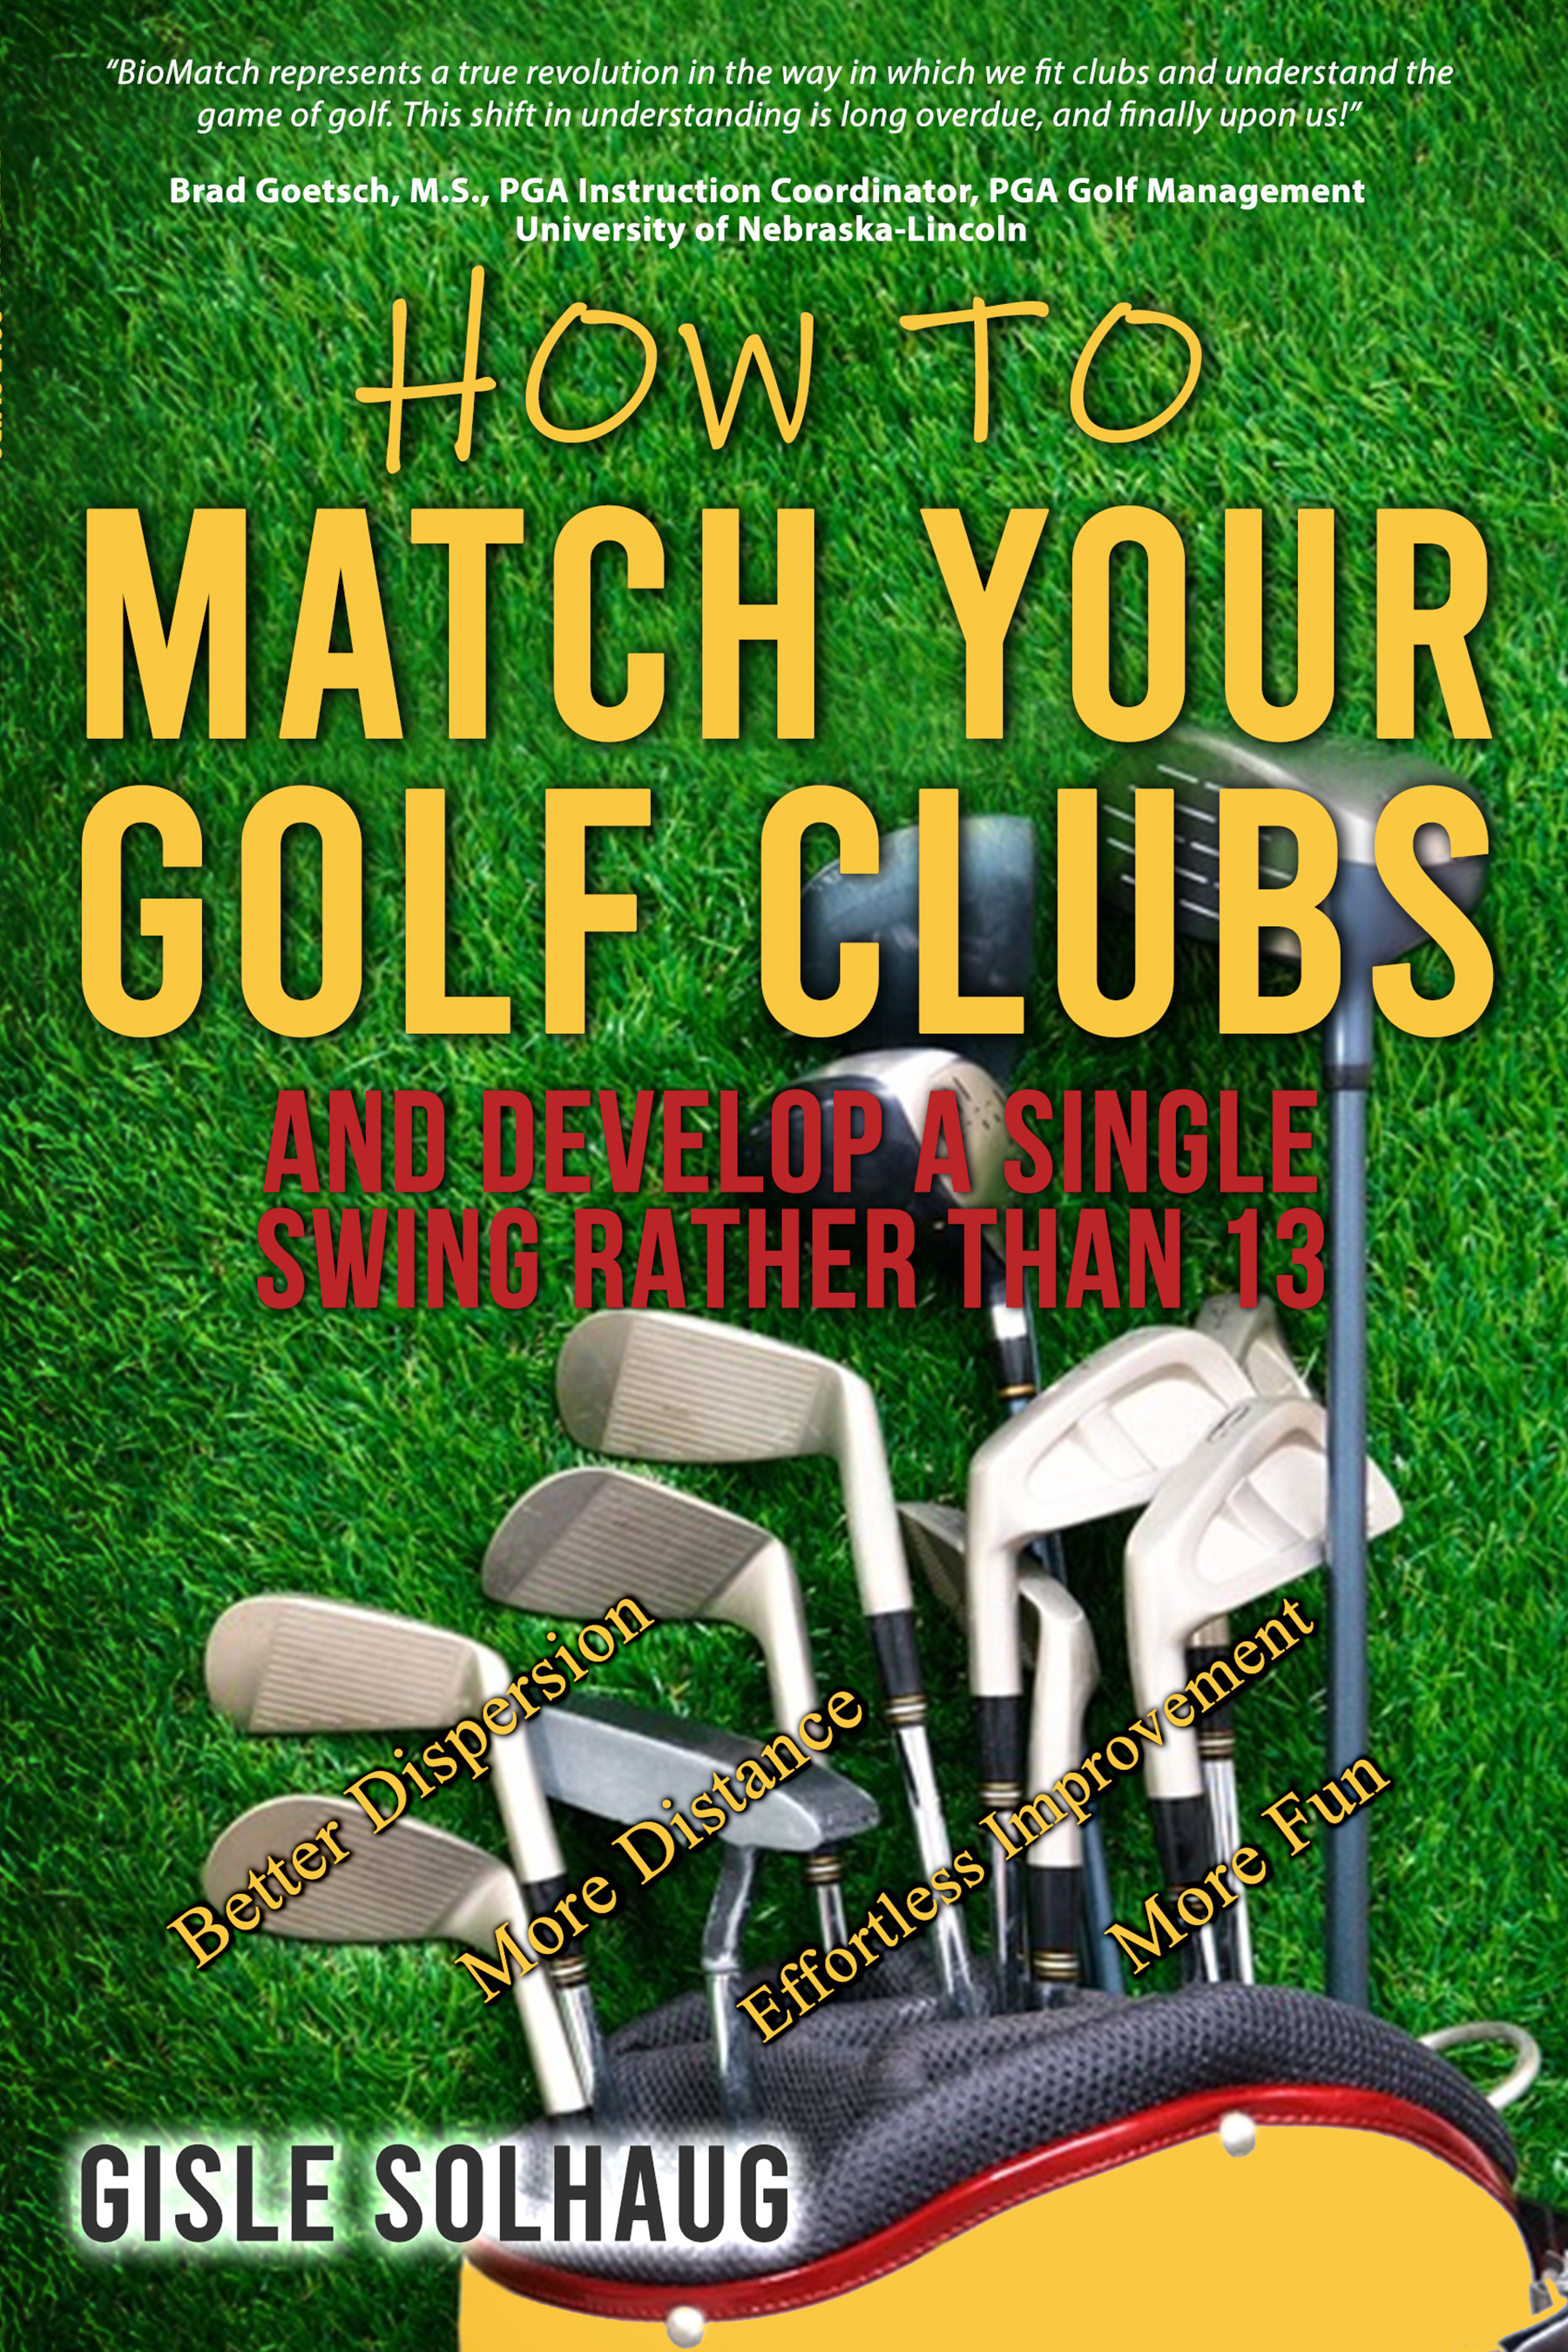 Club Fitting, Improve Your Game